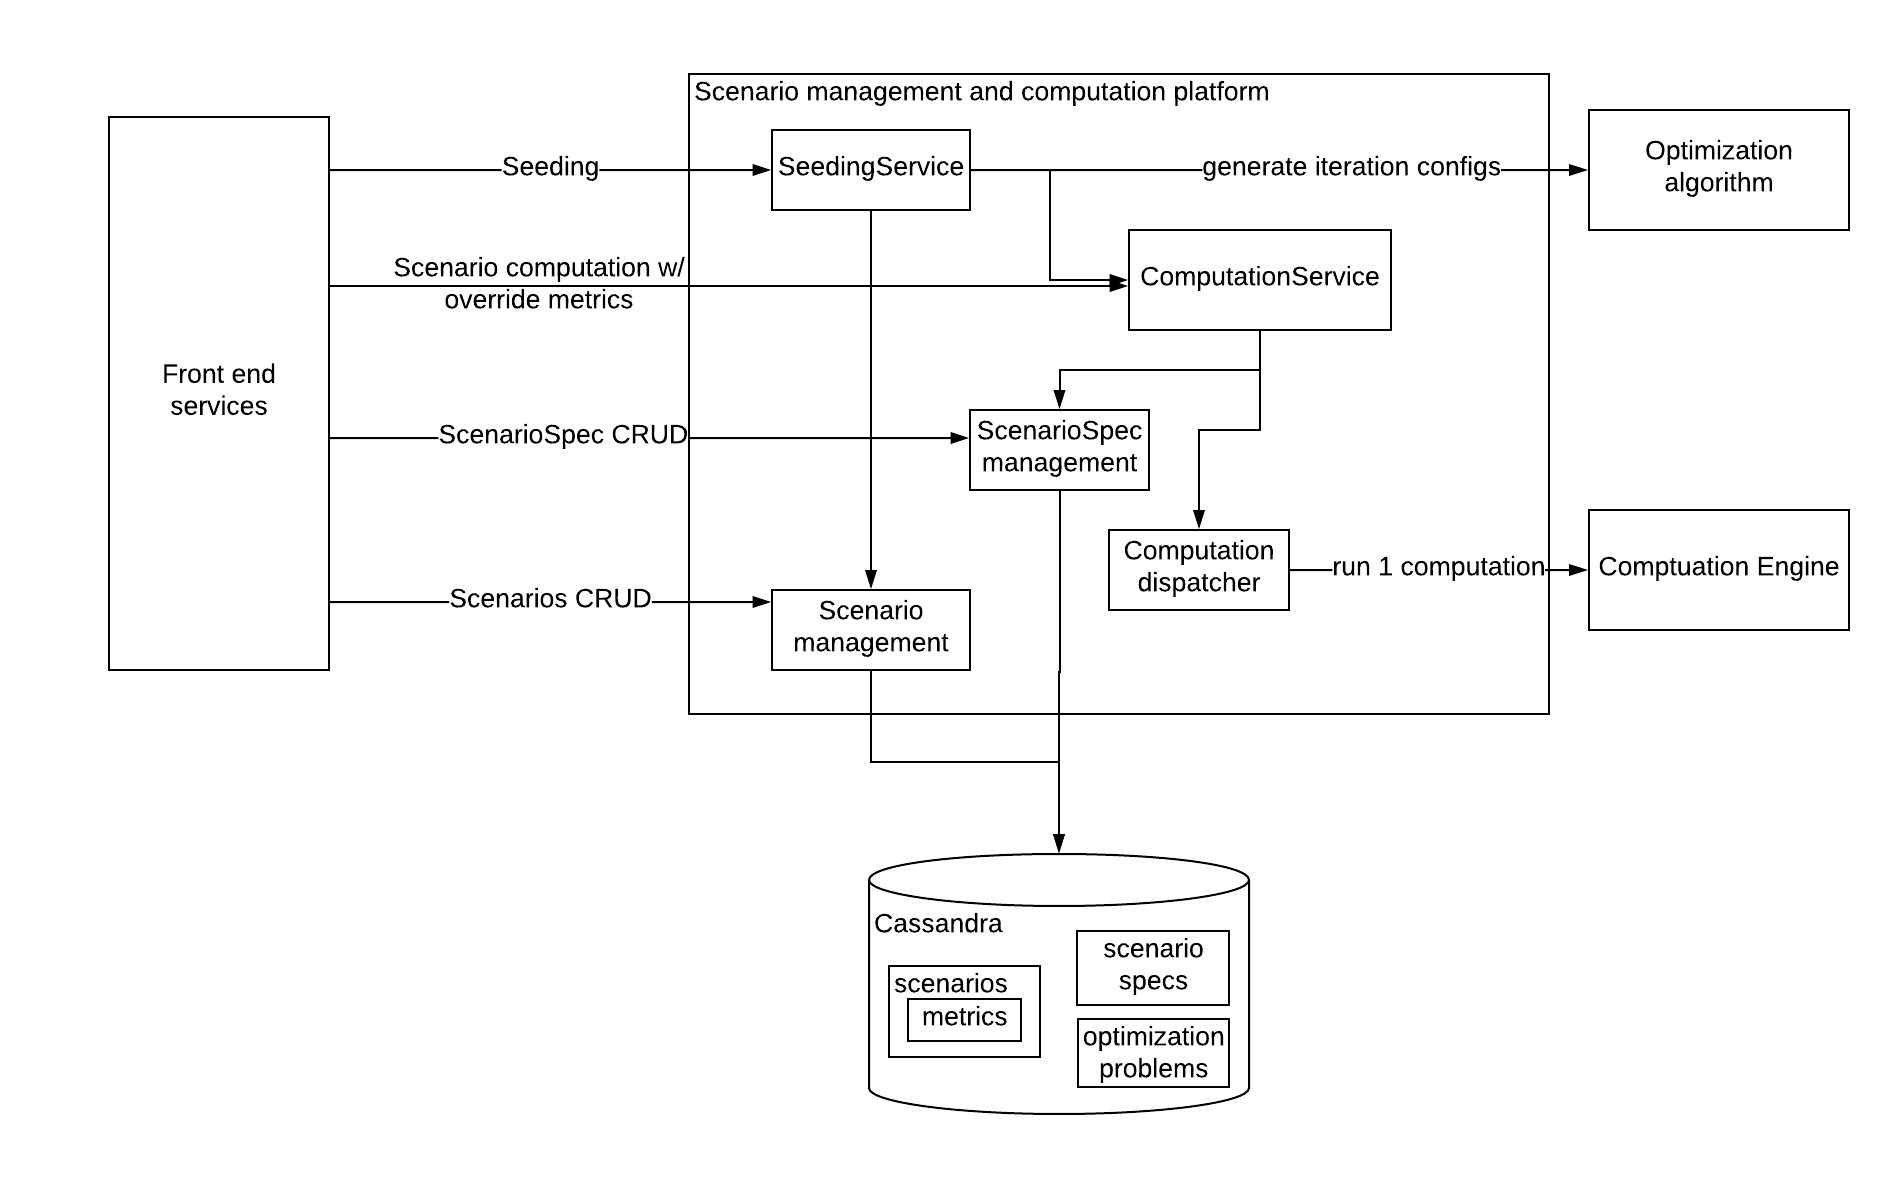 Figure 6: The Scenario Management and Computation platform, making up part of our financial forecasting system, processes scenario entities through computations to arrive at results.